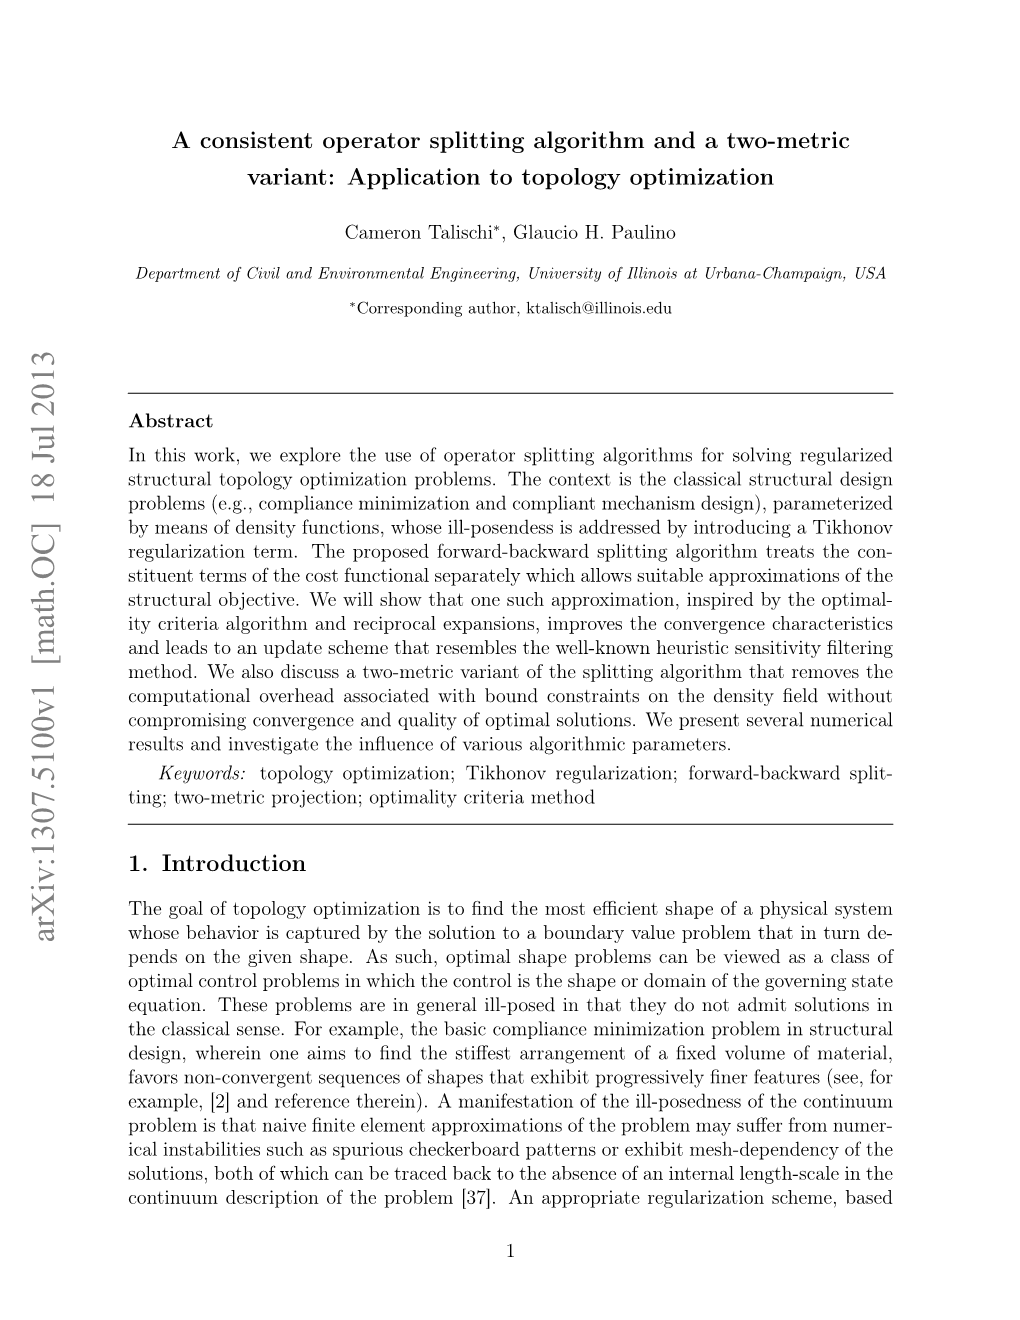 A Consistent Operator Splitting Algorithm and a Two-Metric Variant: Application to Topology Optimization